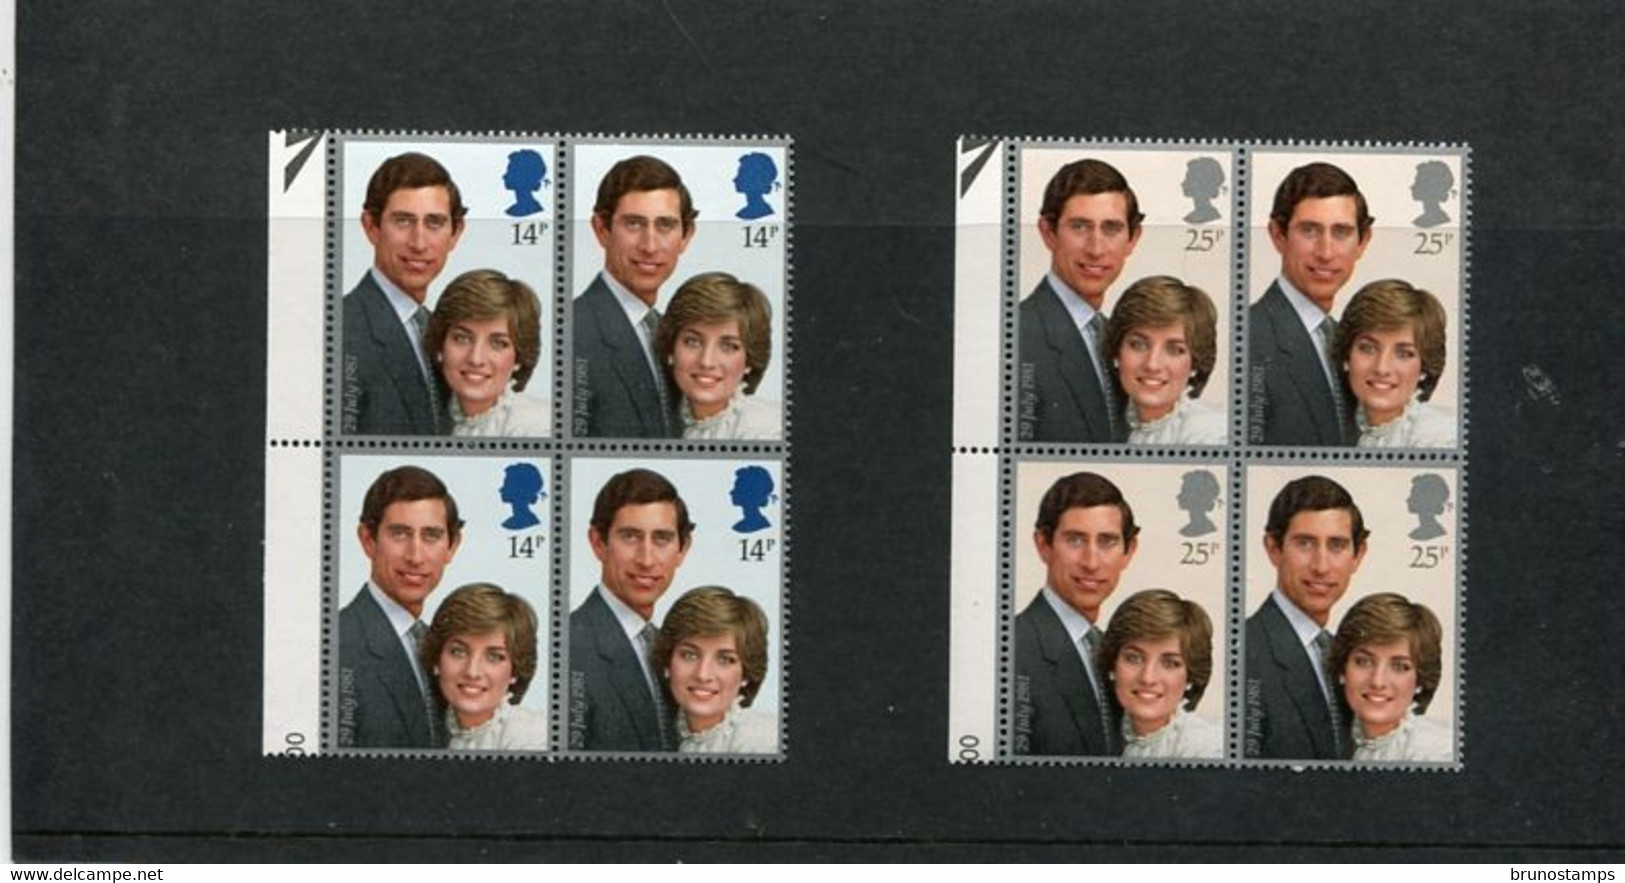 GREAT BRITAIN - 1981  ROYAL WEDDING  SET  BLOCK OF 4  MINT NH - Unclassified